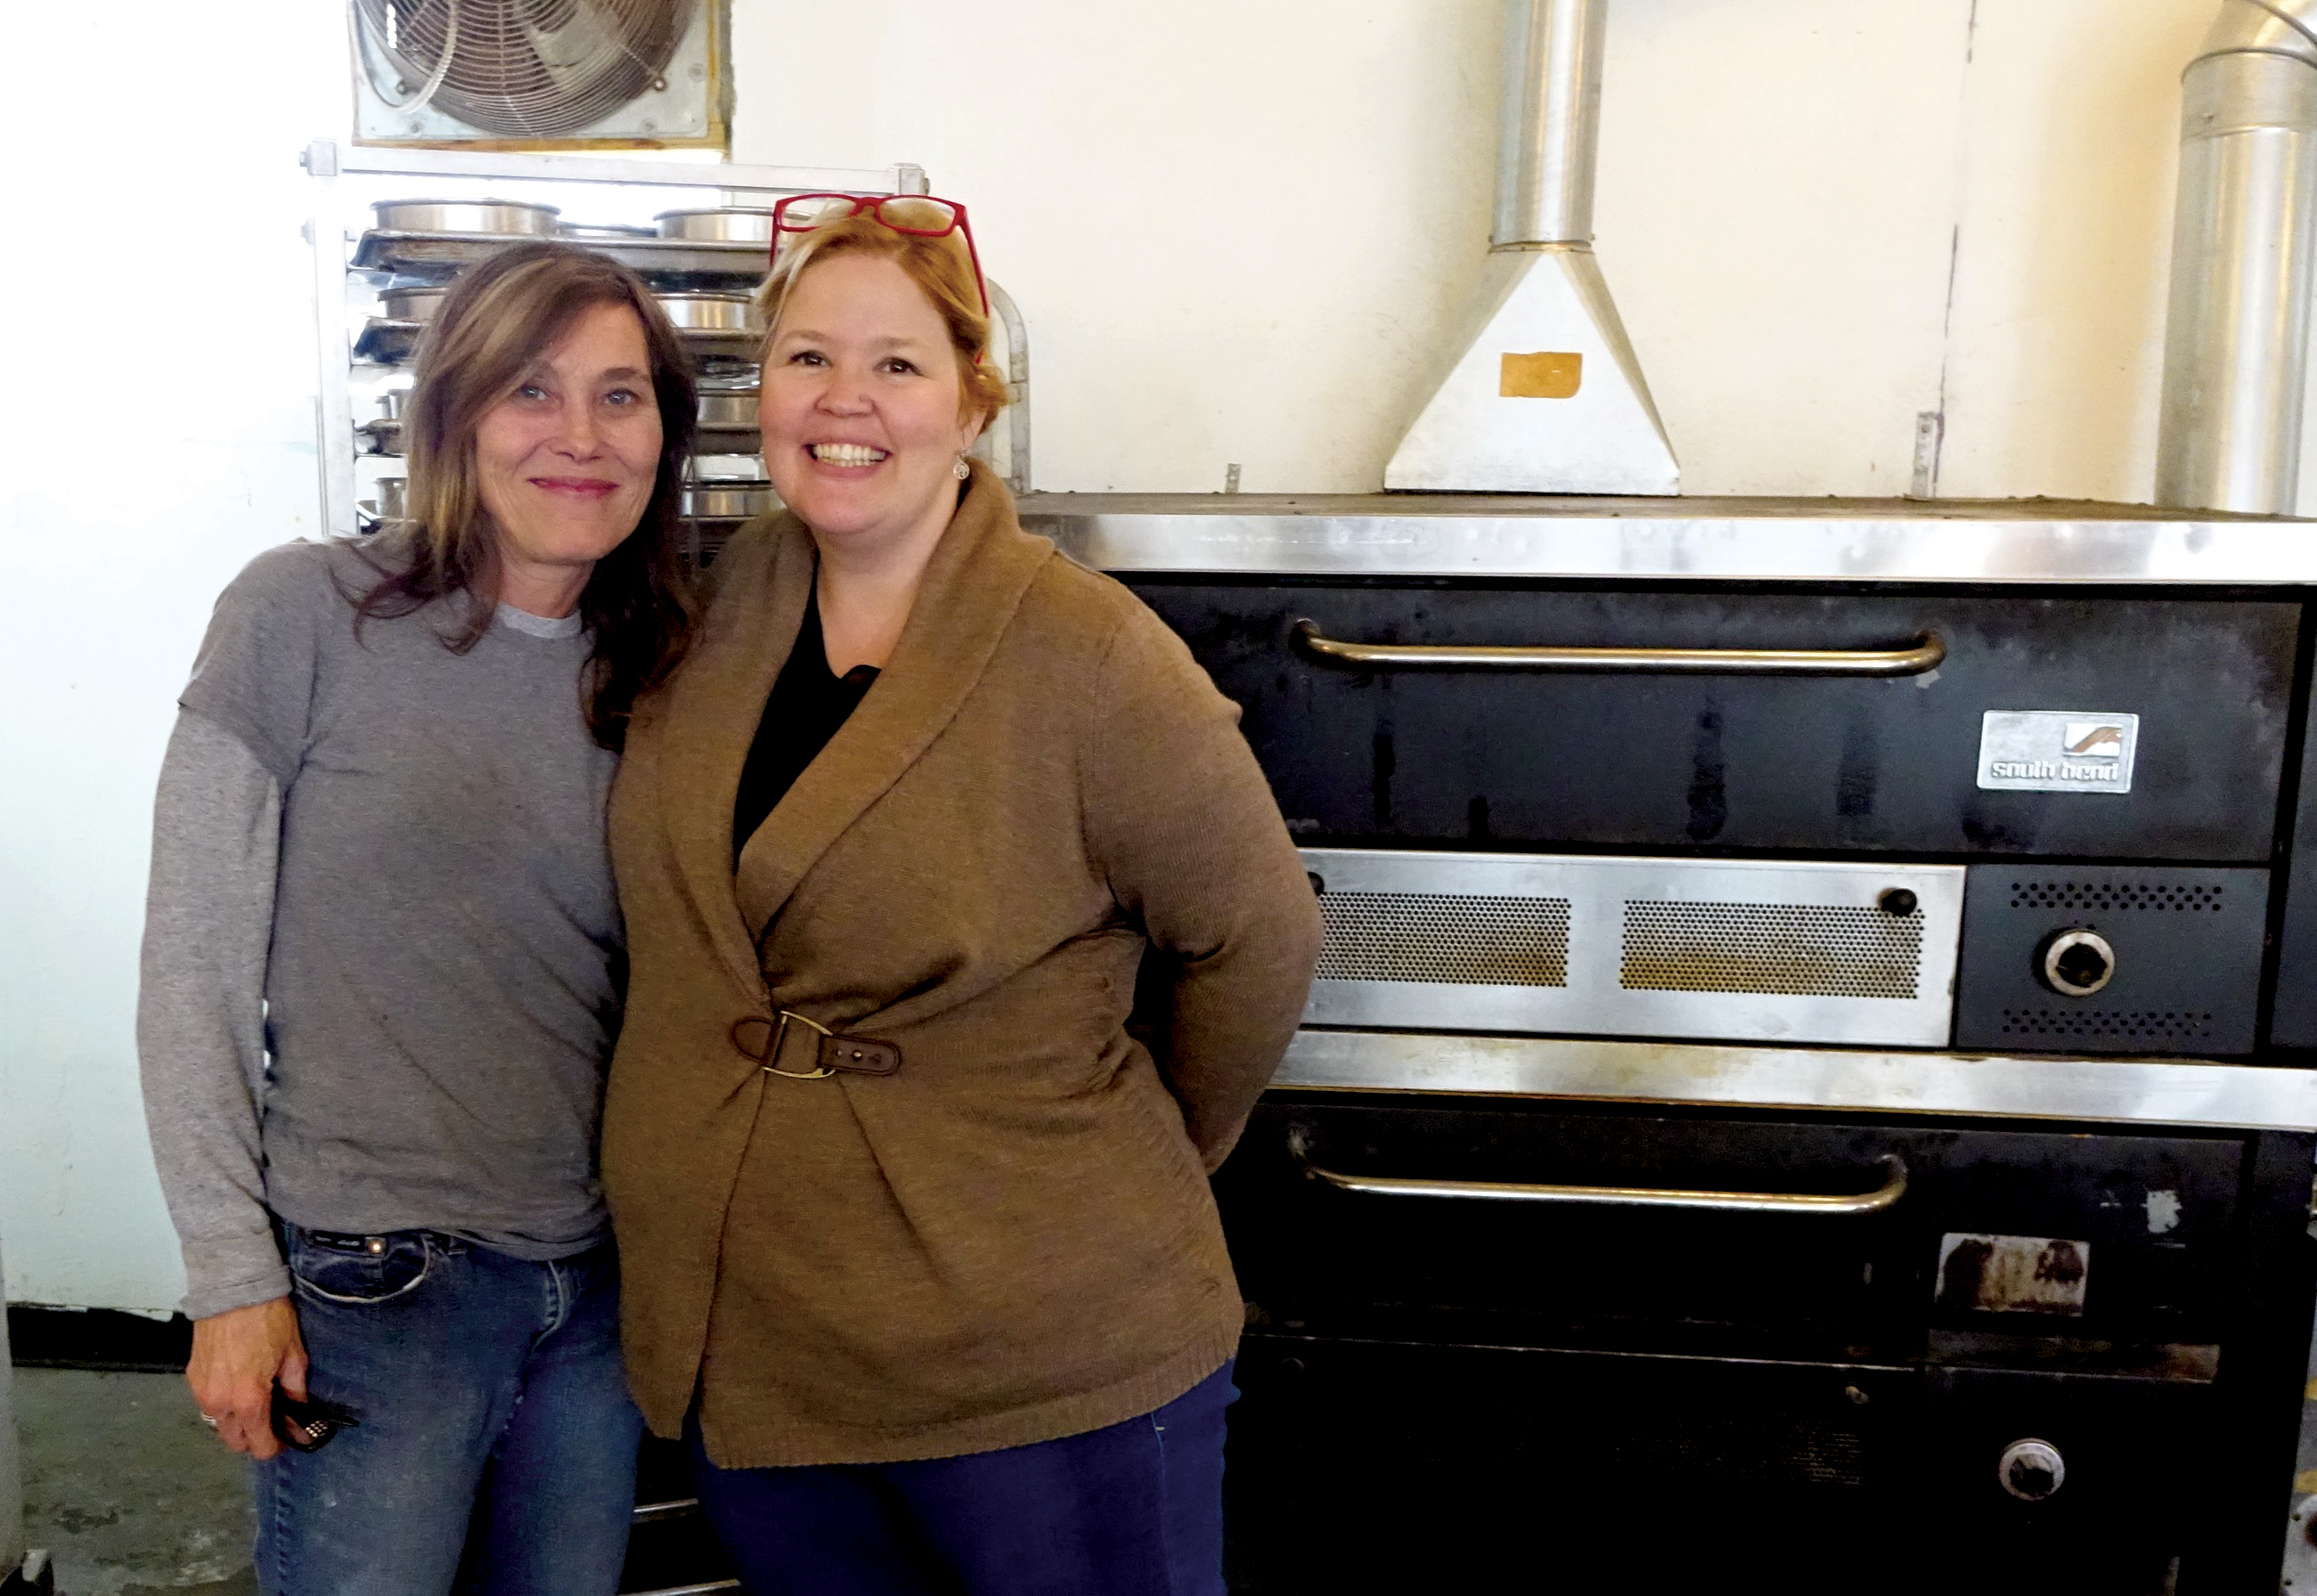 Kitchen Convos Episode 5: On the road with Shelley Ritchie